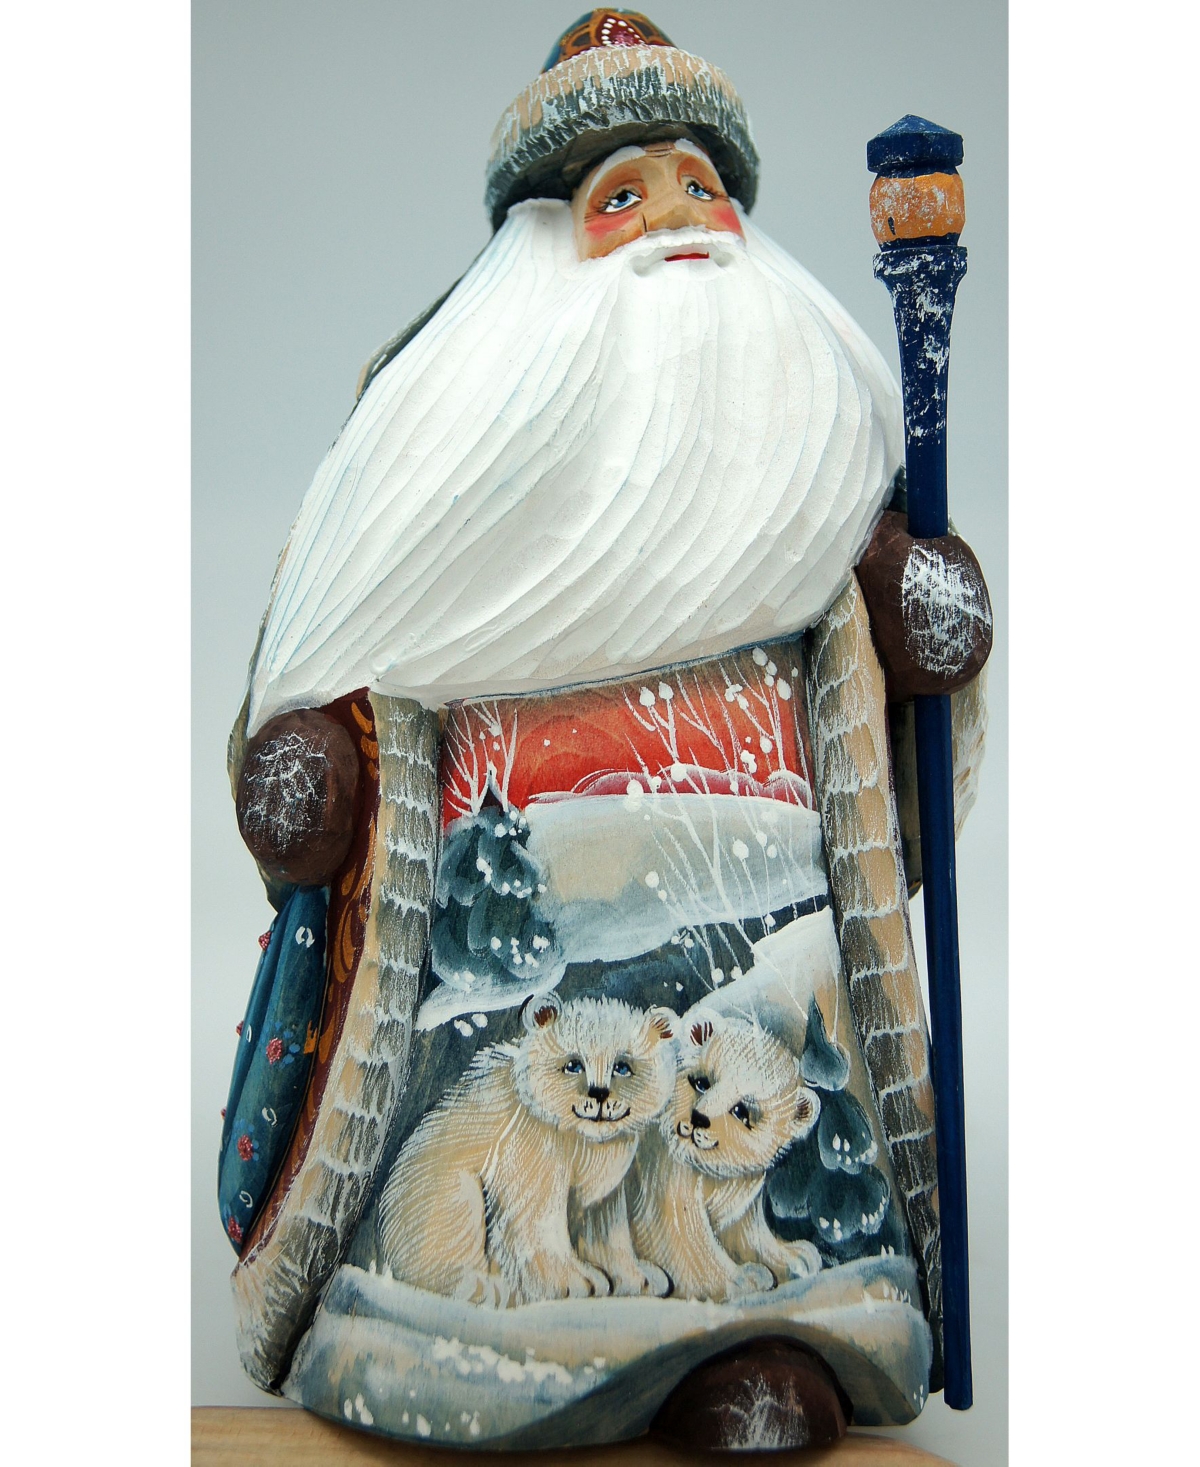 Woodcarved and Hand Painted Polar Bears and Hand Painted Santa - Multi